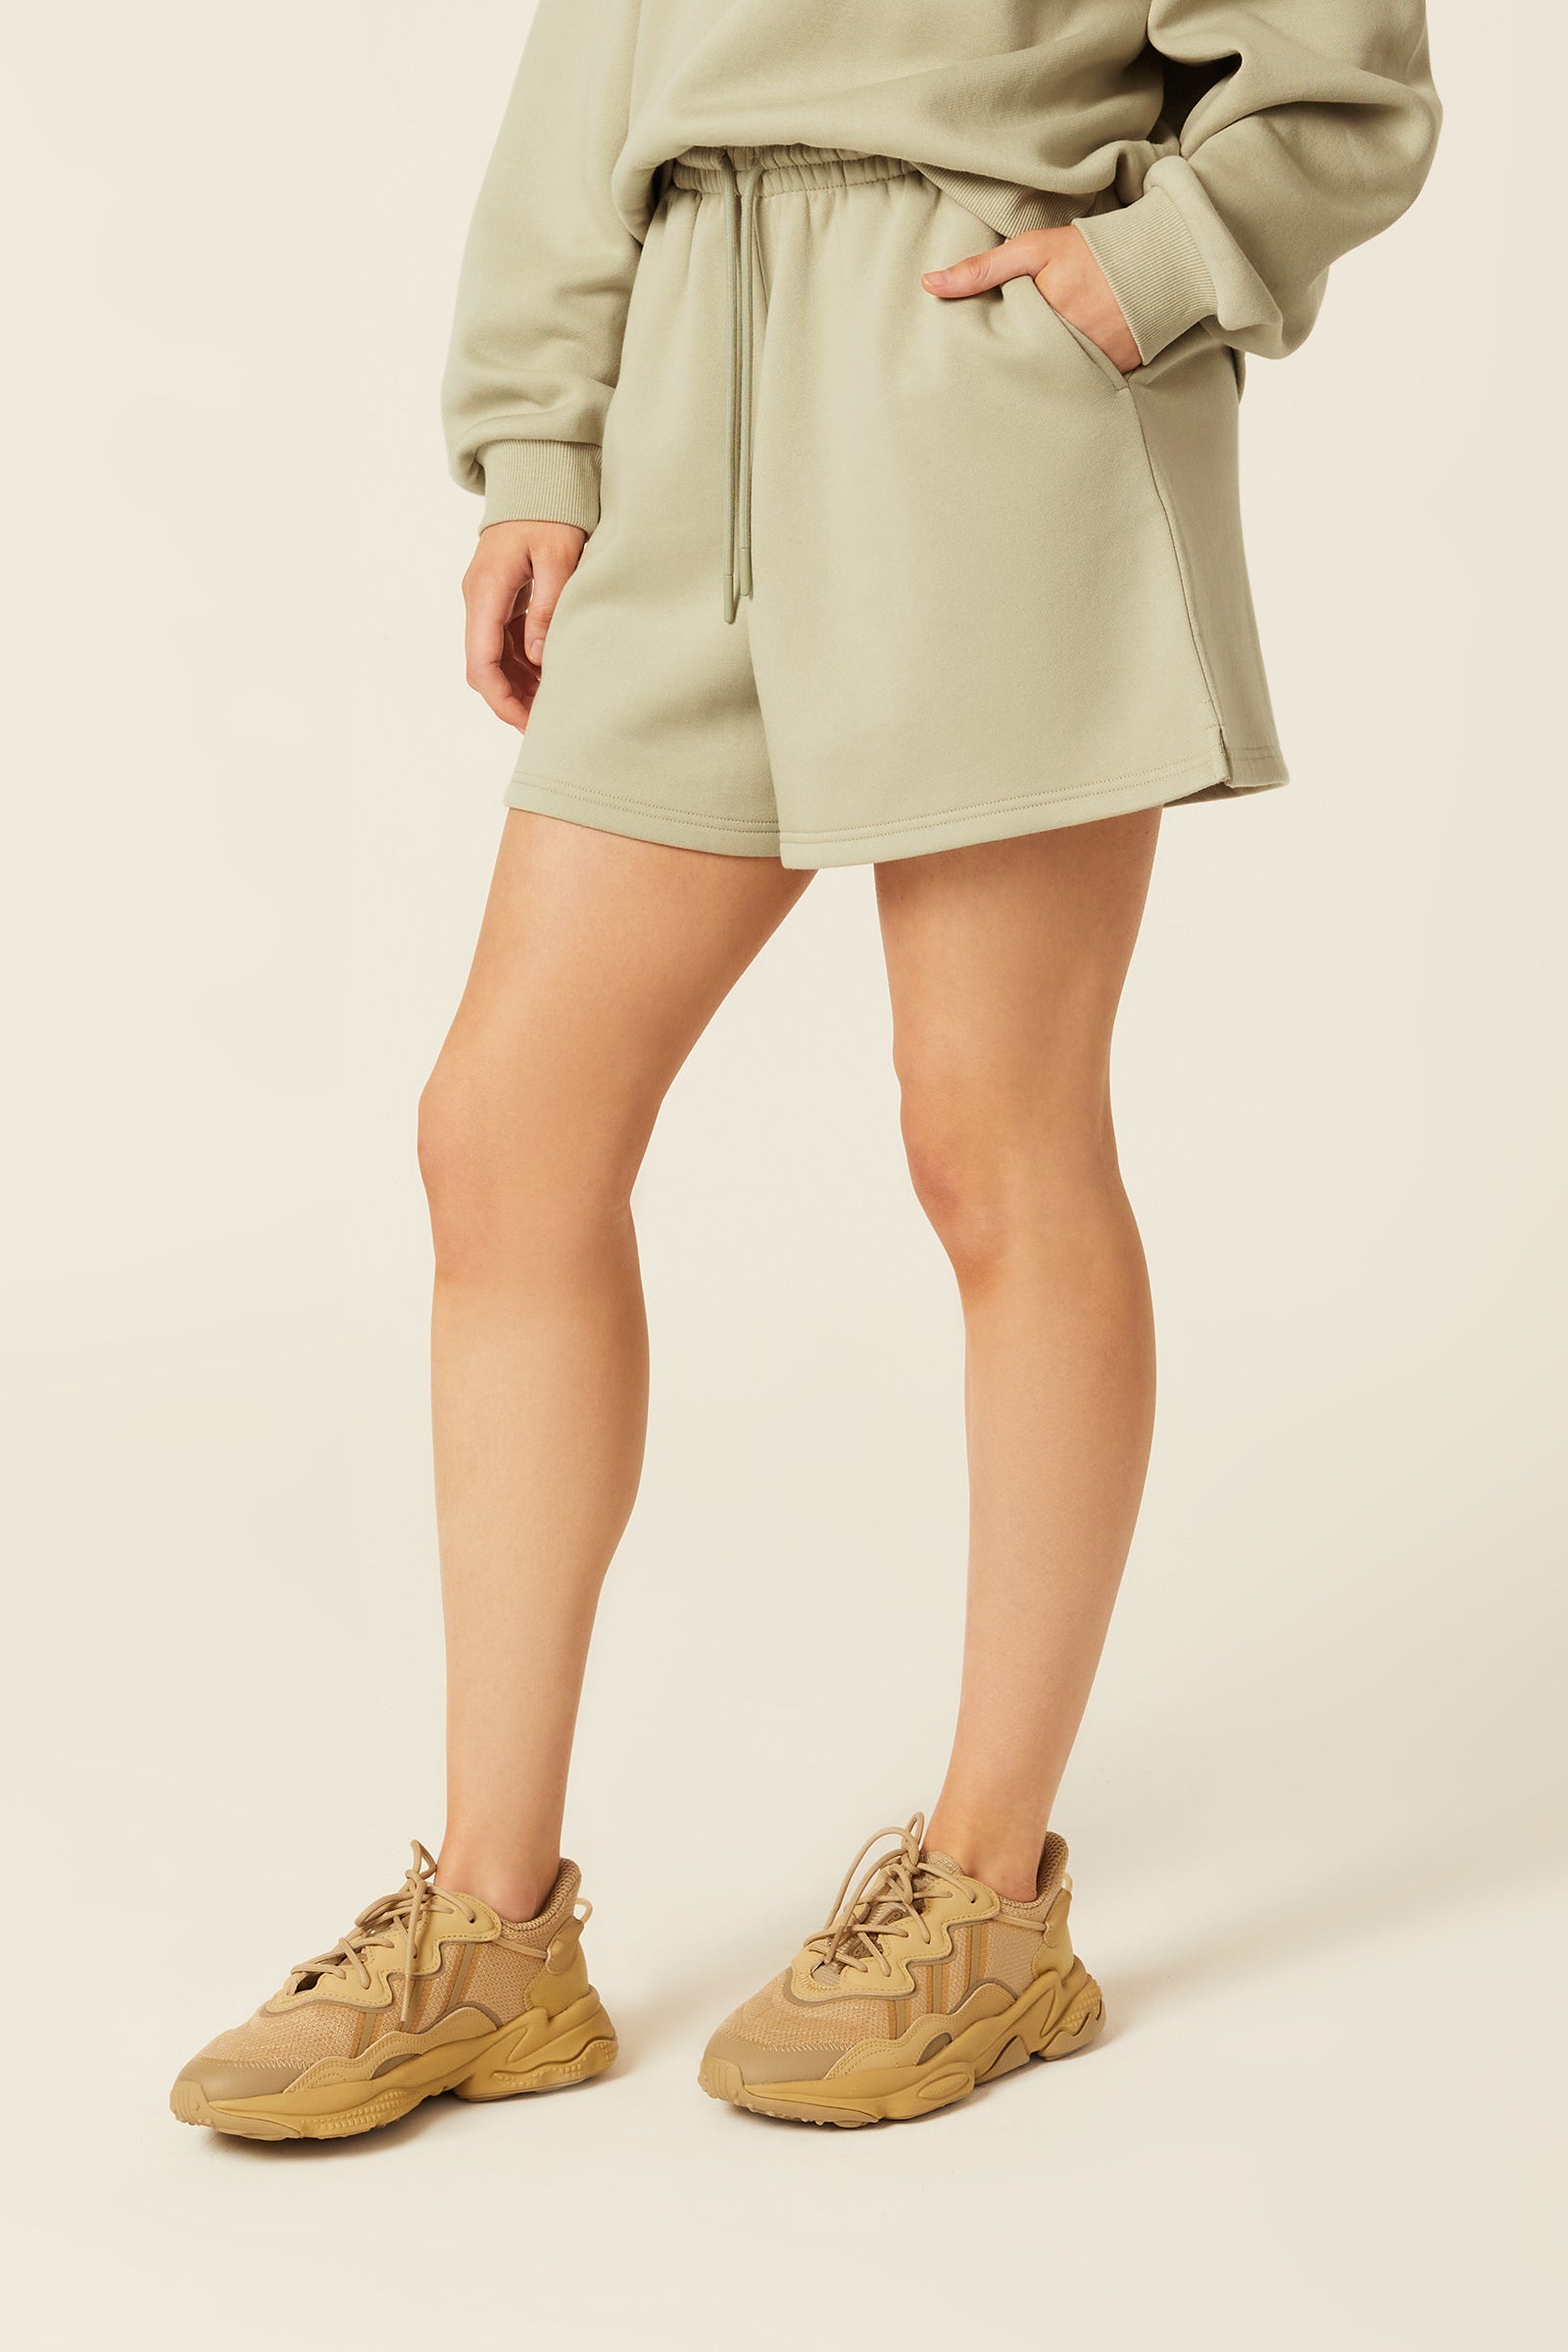 Nude Lucy Carter Curated Short In A Green Artichoke Colour 